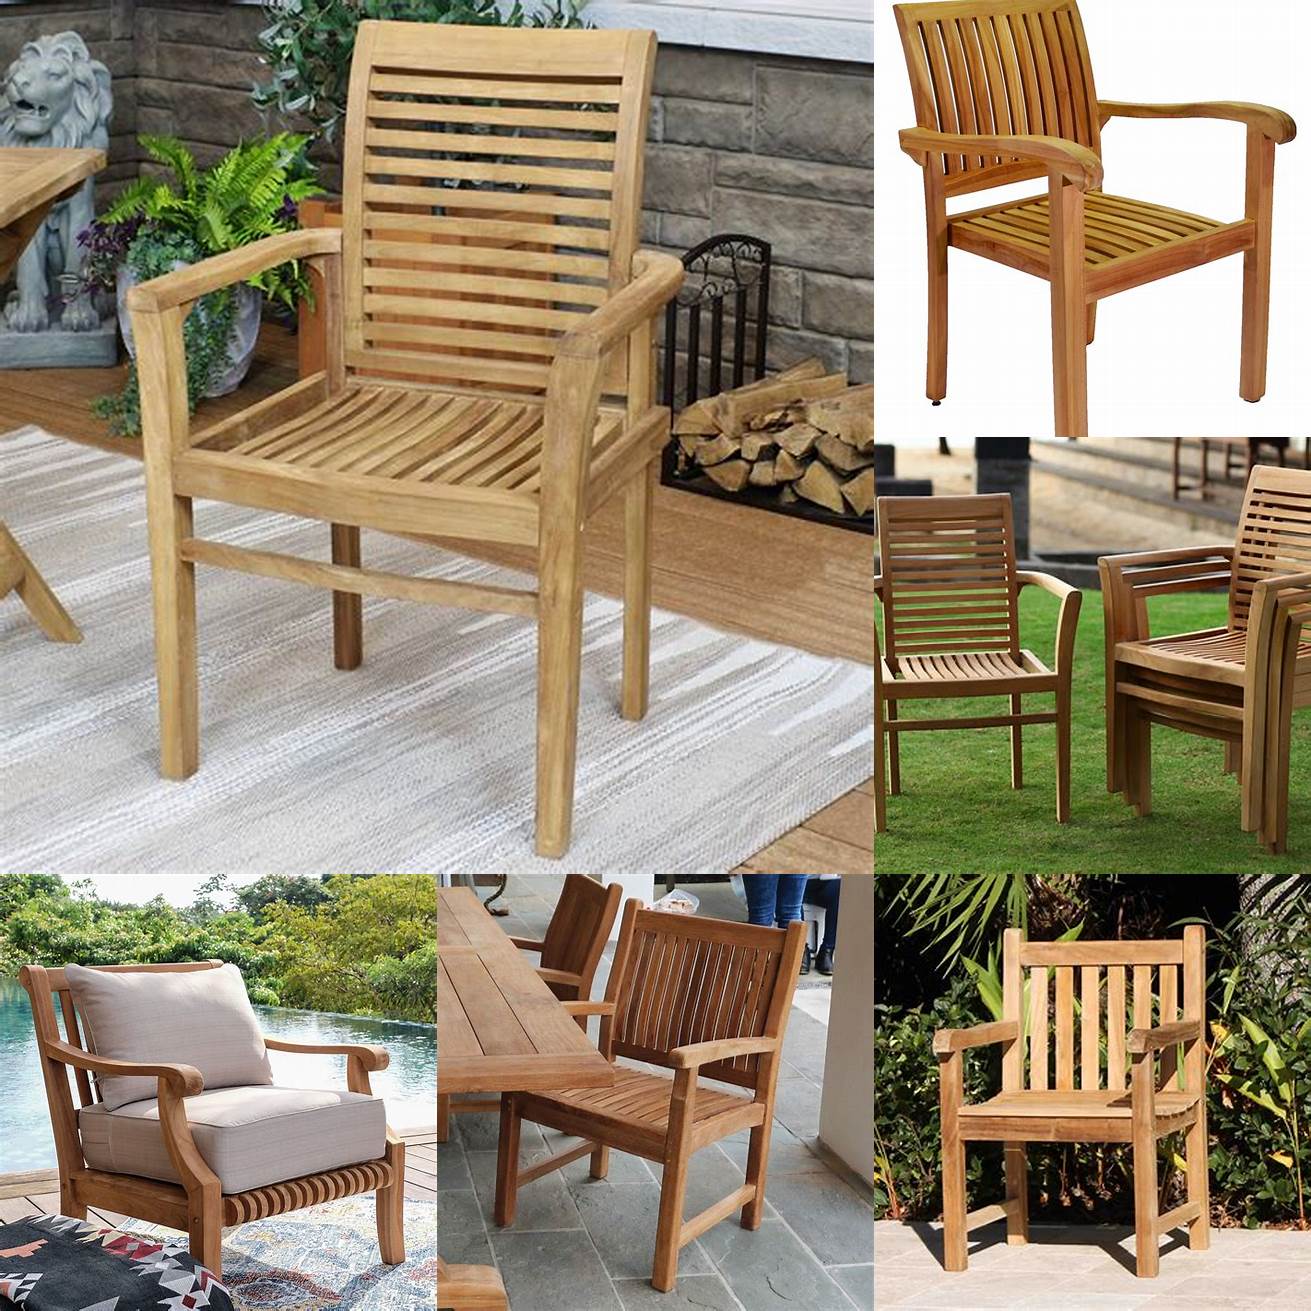 A picture of a teak armchair